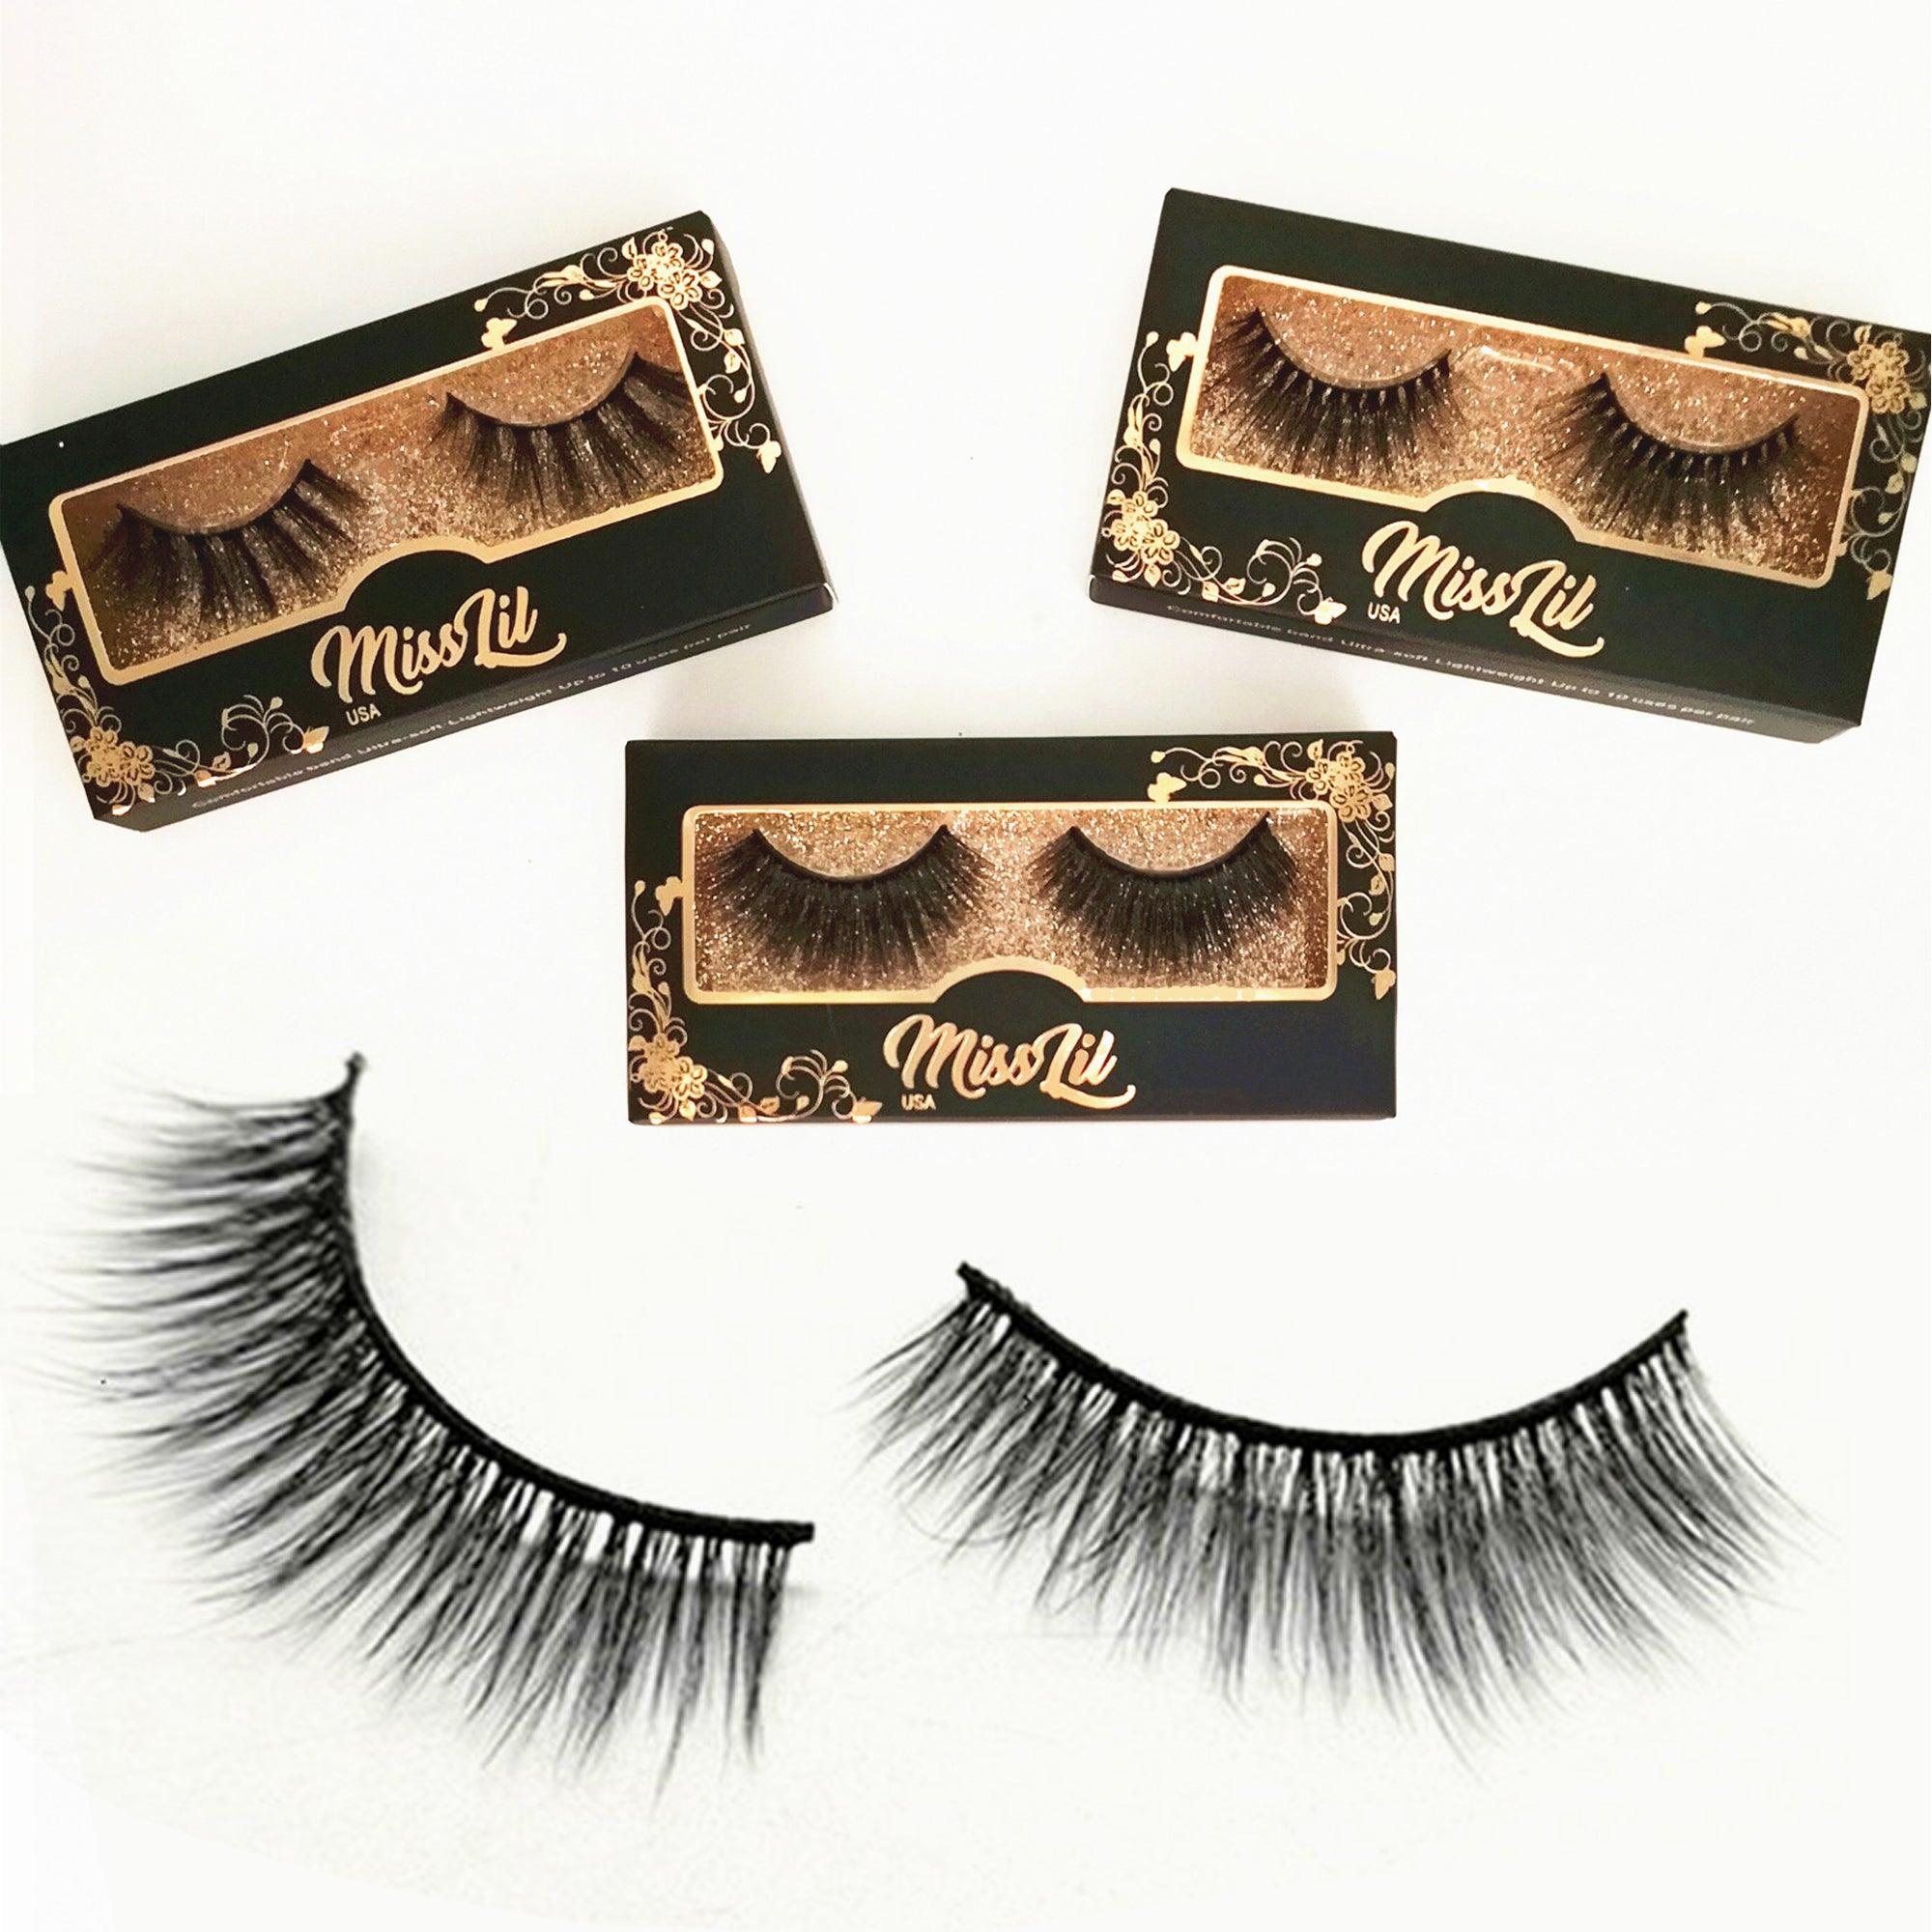 1-Pair Miss Lil USA Lashes #21 (Pack of 12) - Miss Lil USA Wholesale